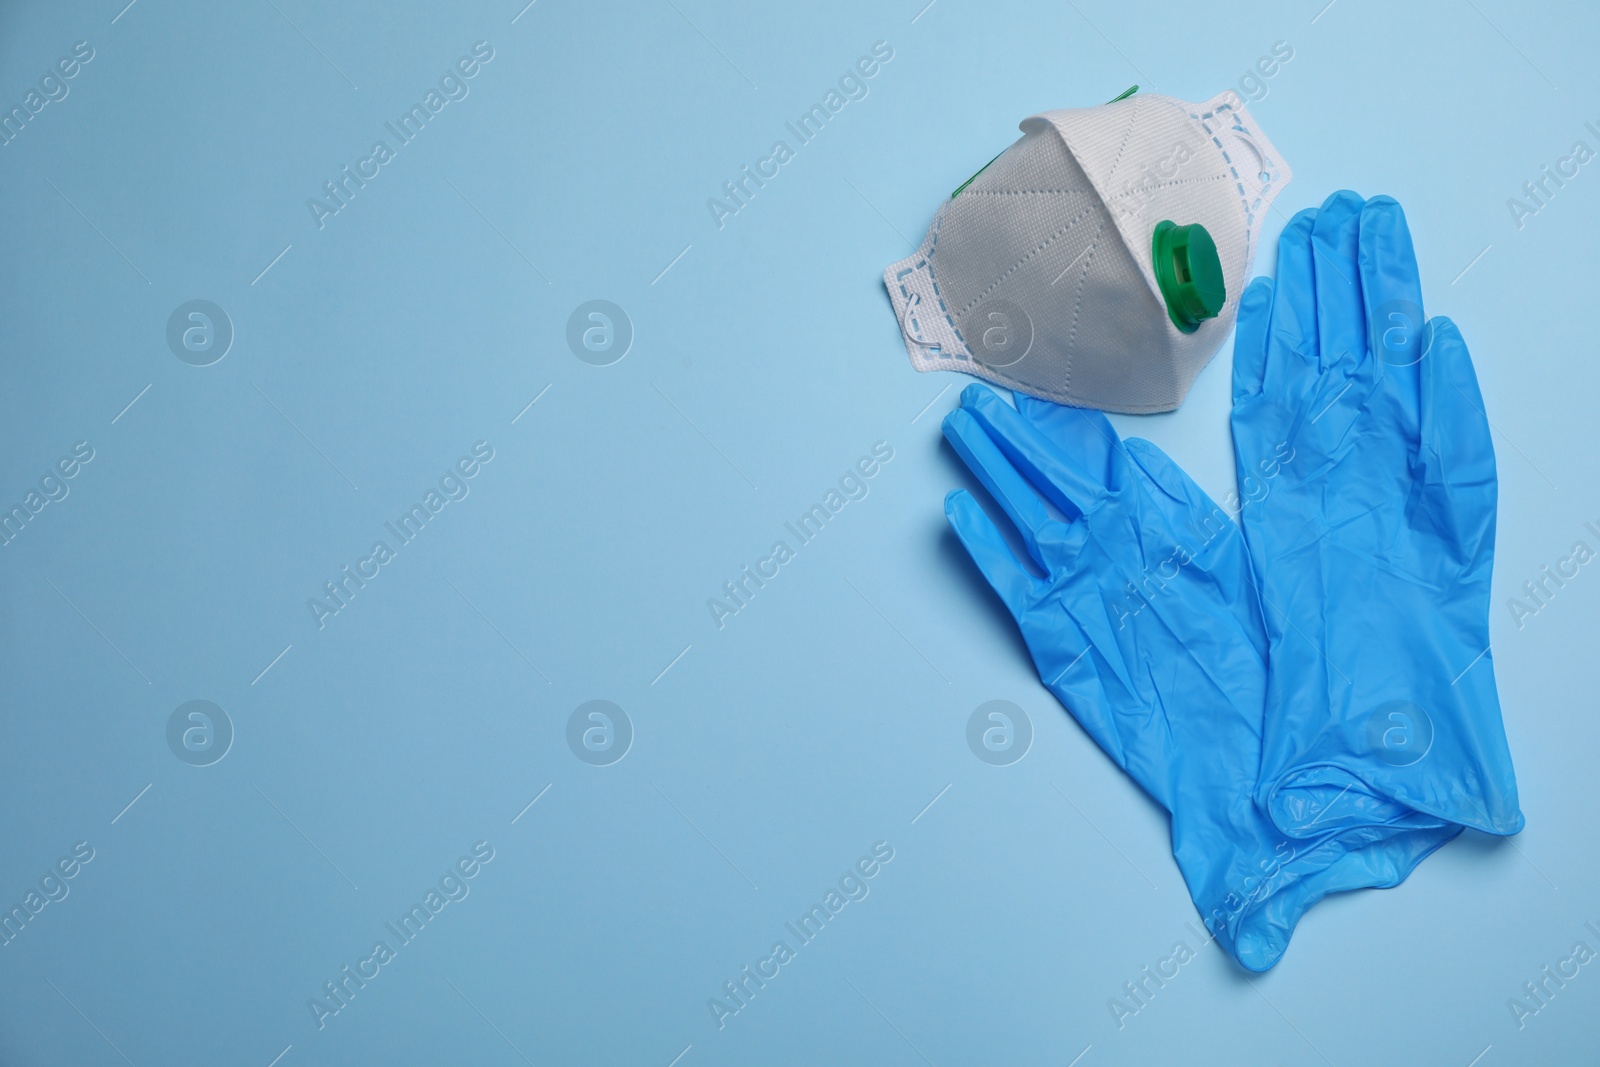 Photo of Medical gloves and respiratory mask on light blue background, flat lay with space for text. Safety equipment